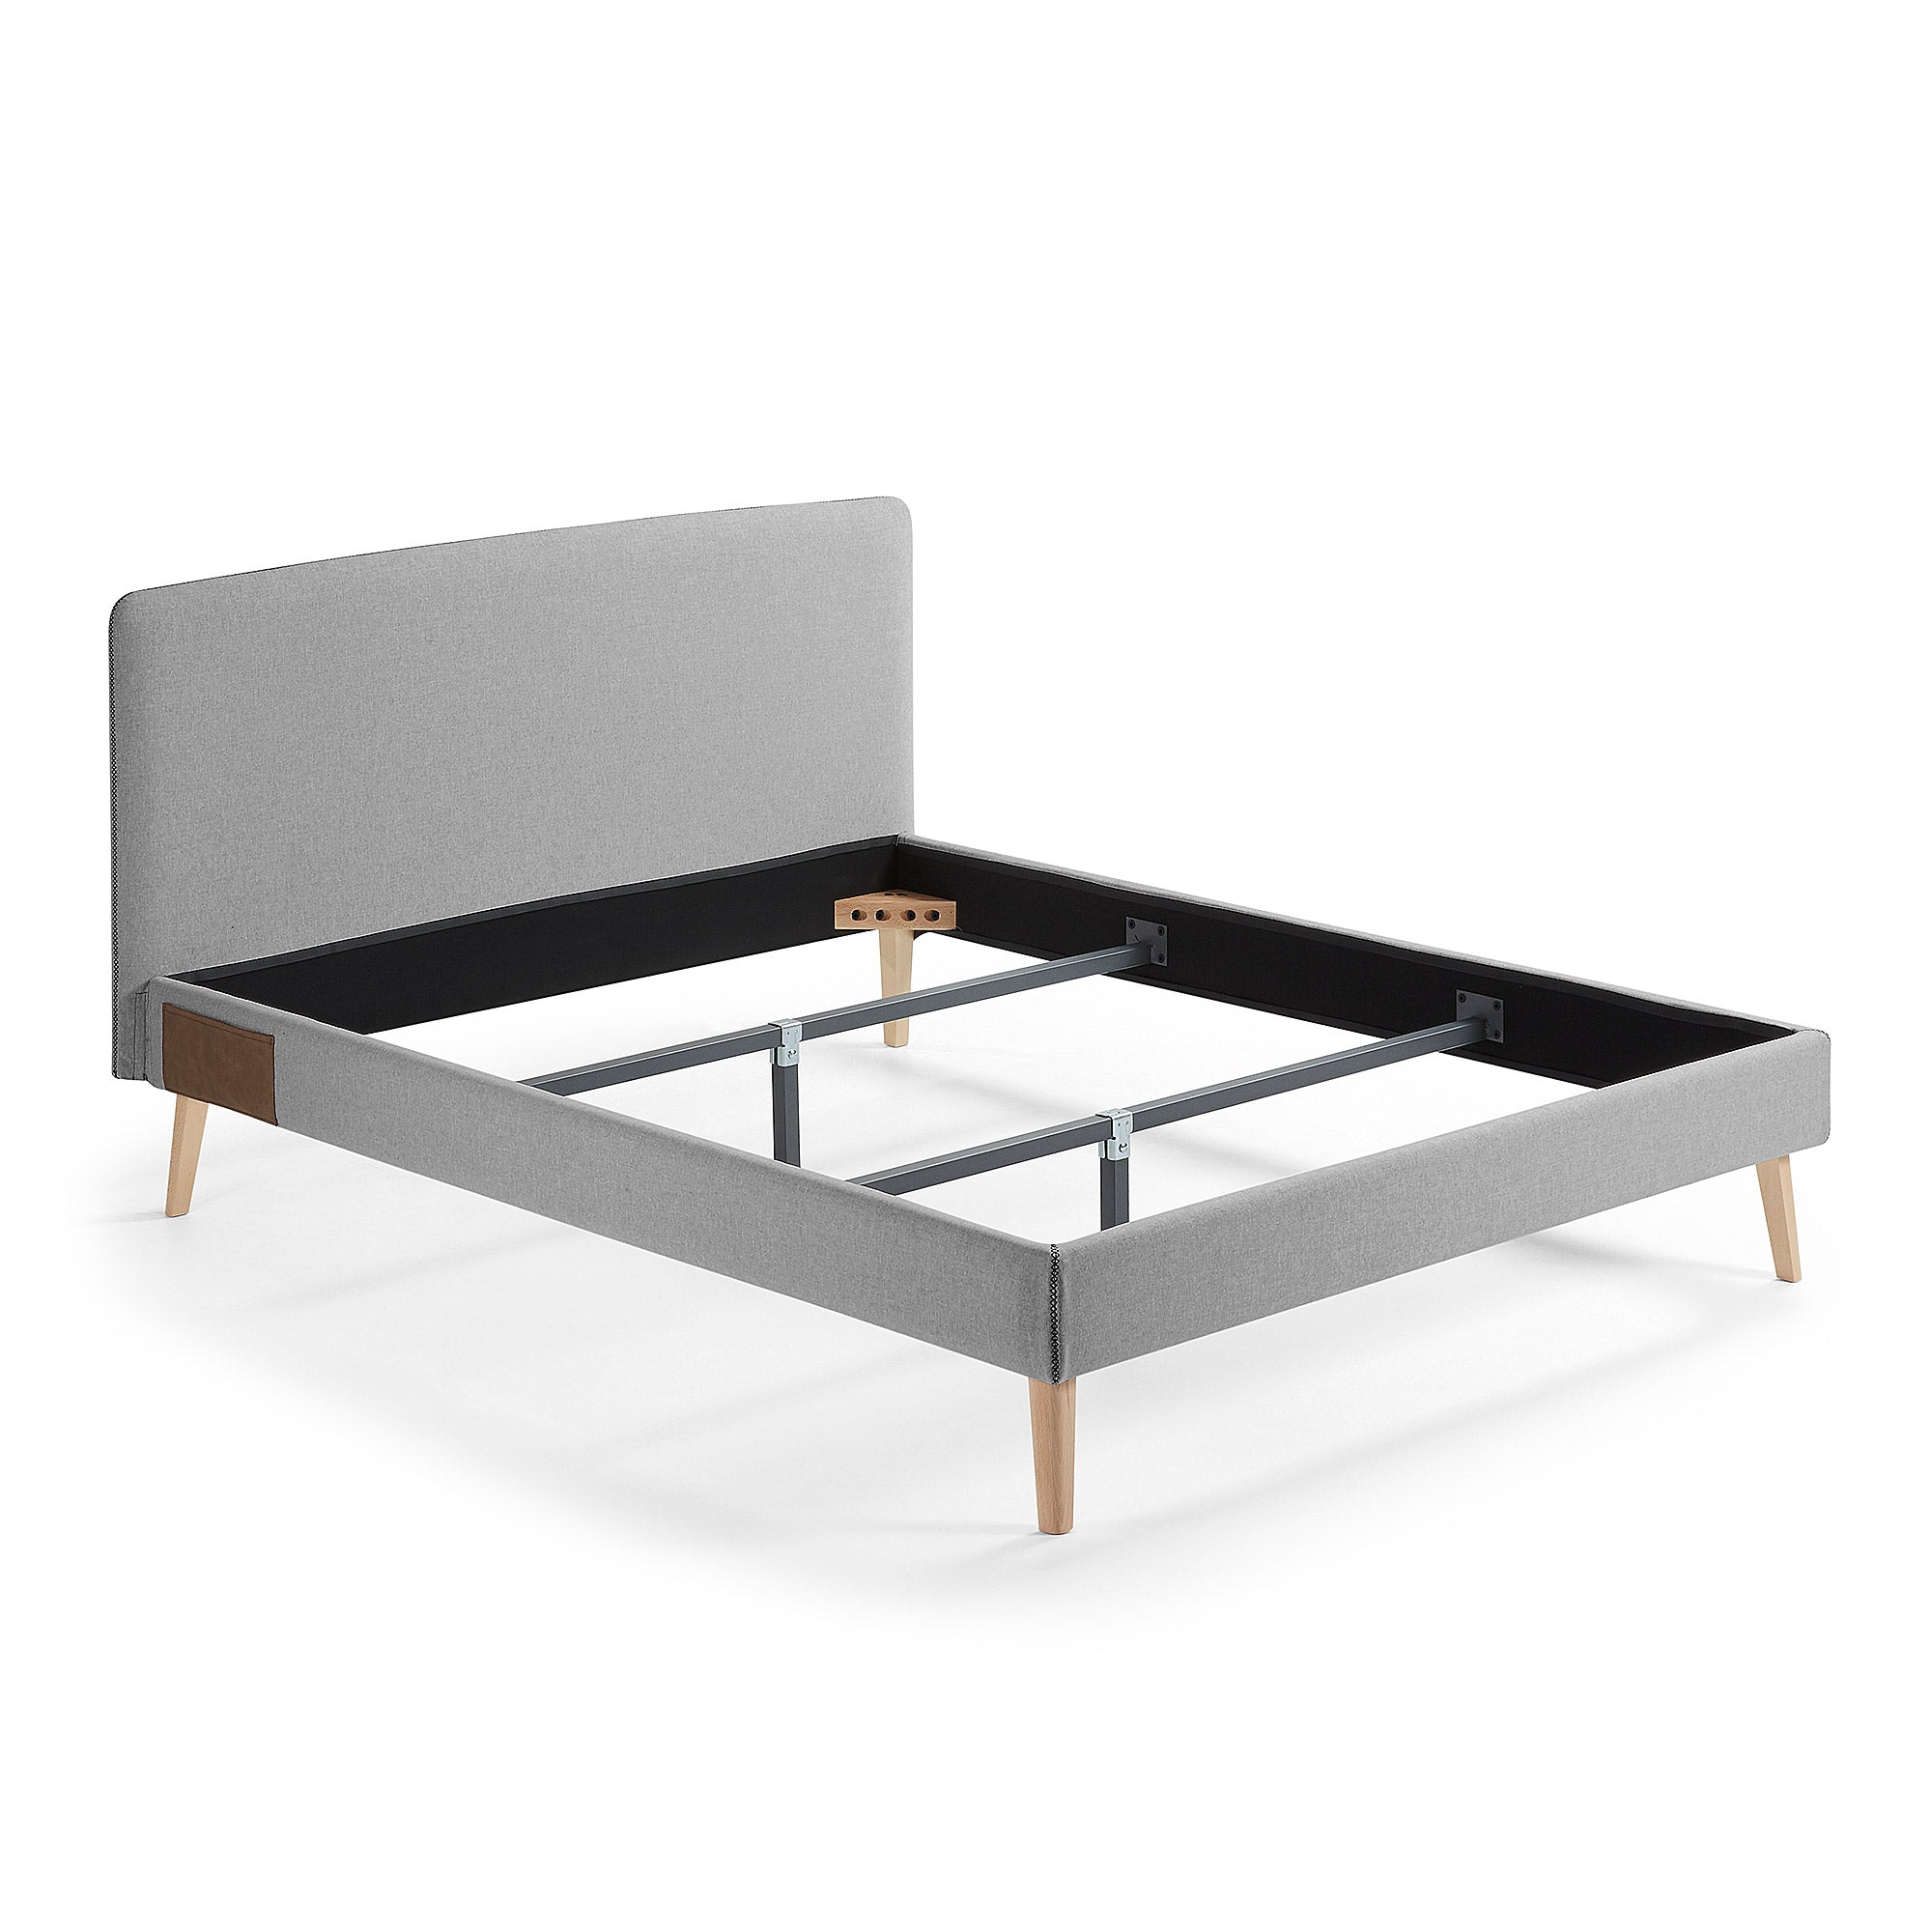 Dyla bed with removable cover in grey, with solid beech wood legs for a 160 x 200 cm mattress